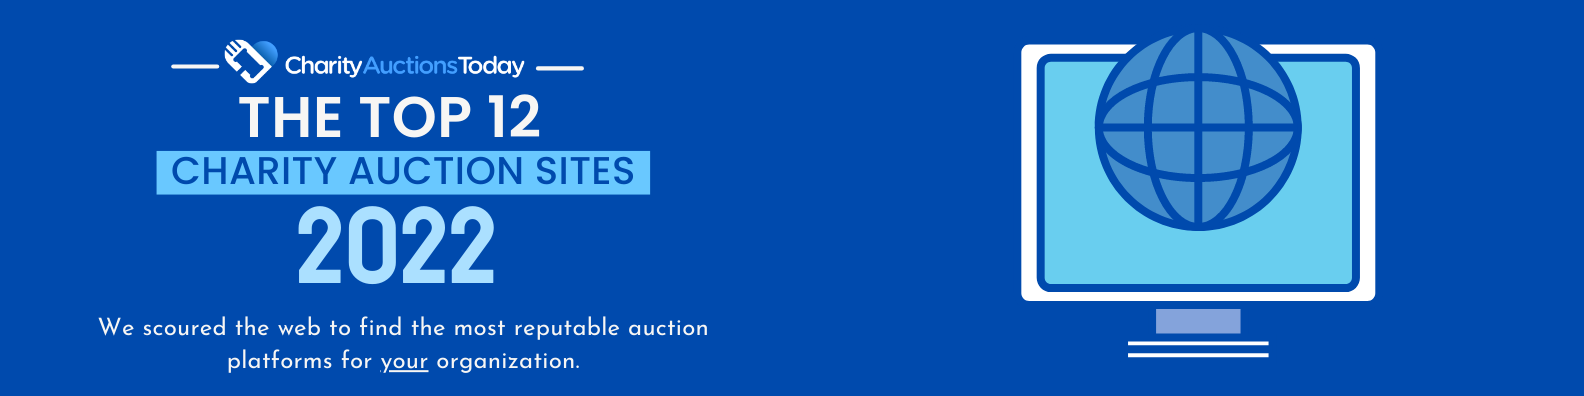 Types of Auction Fundraisers: Silent, Live, Online